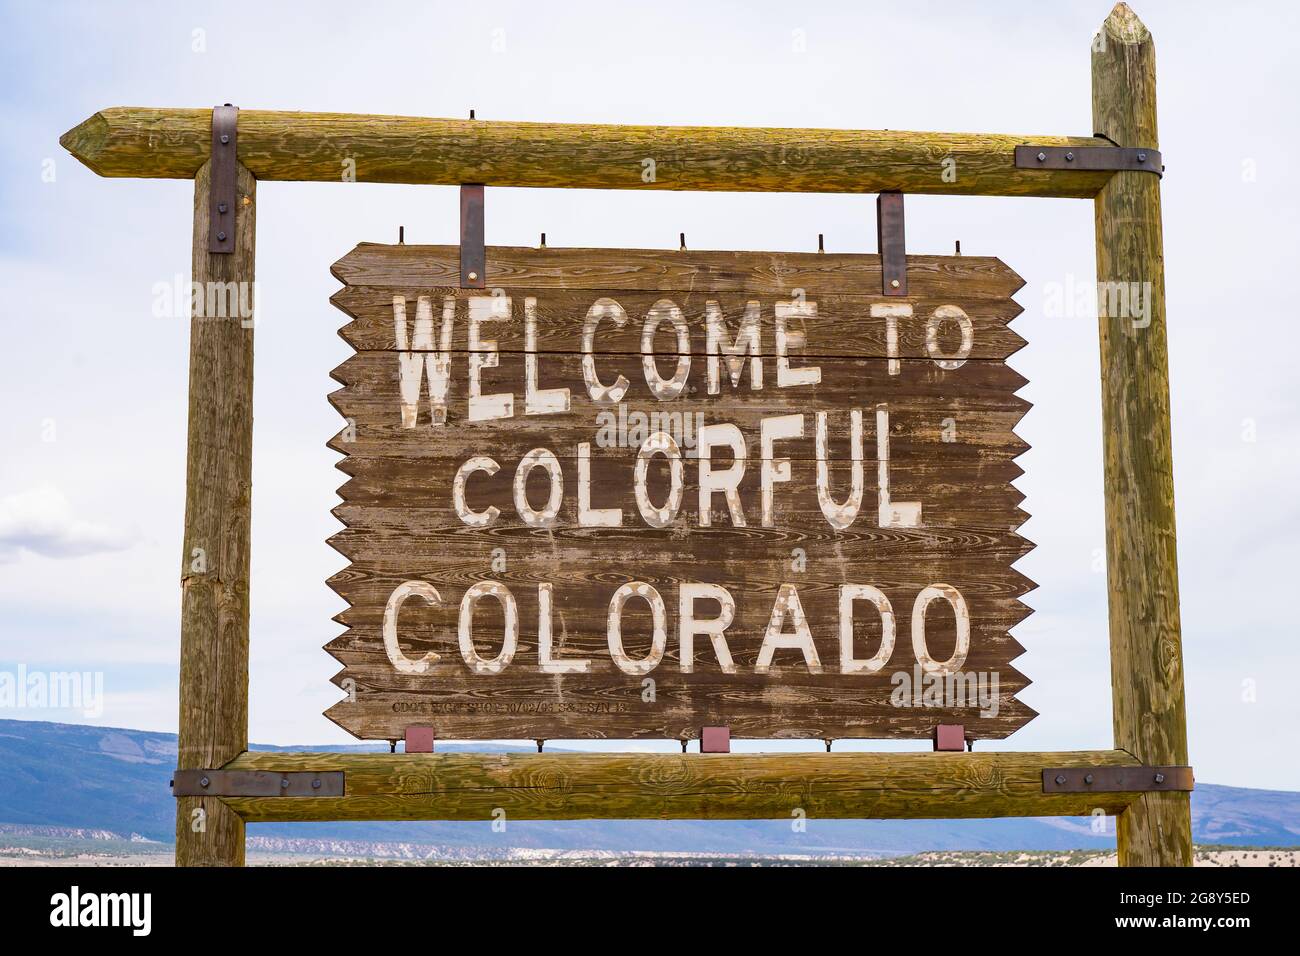 Welcome to colorful Colorado sign along the road at the Colorado and Utah border. Stock Photo